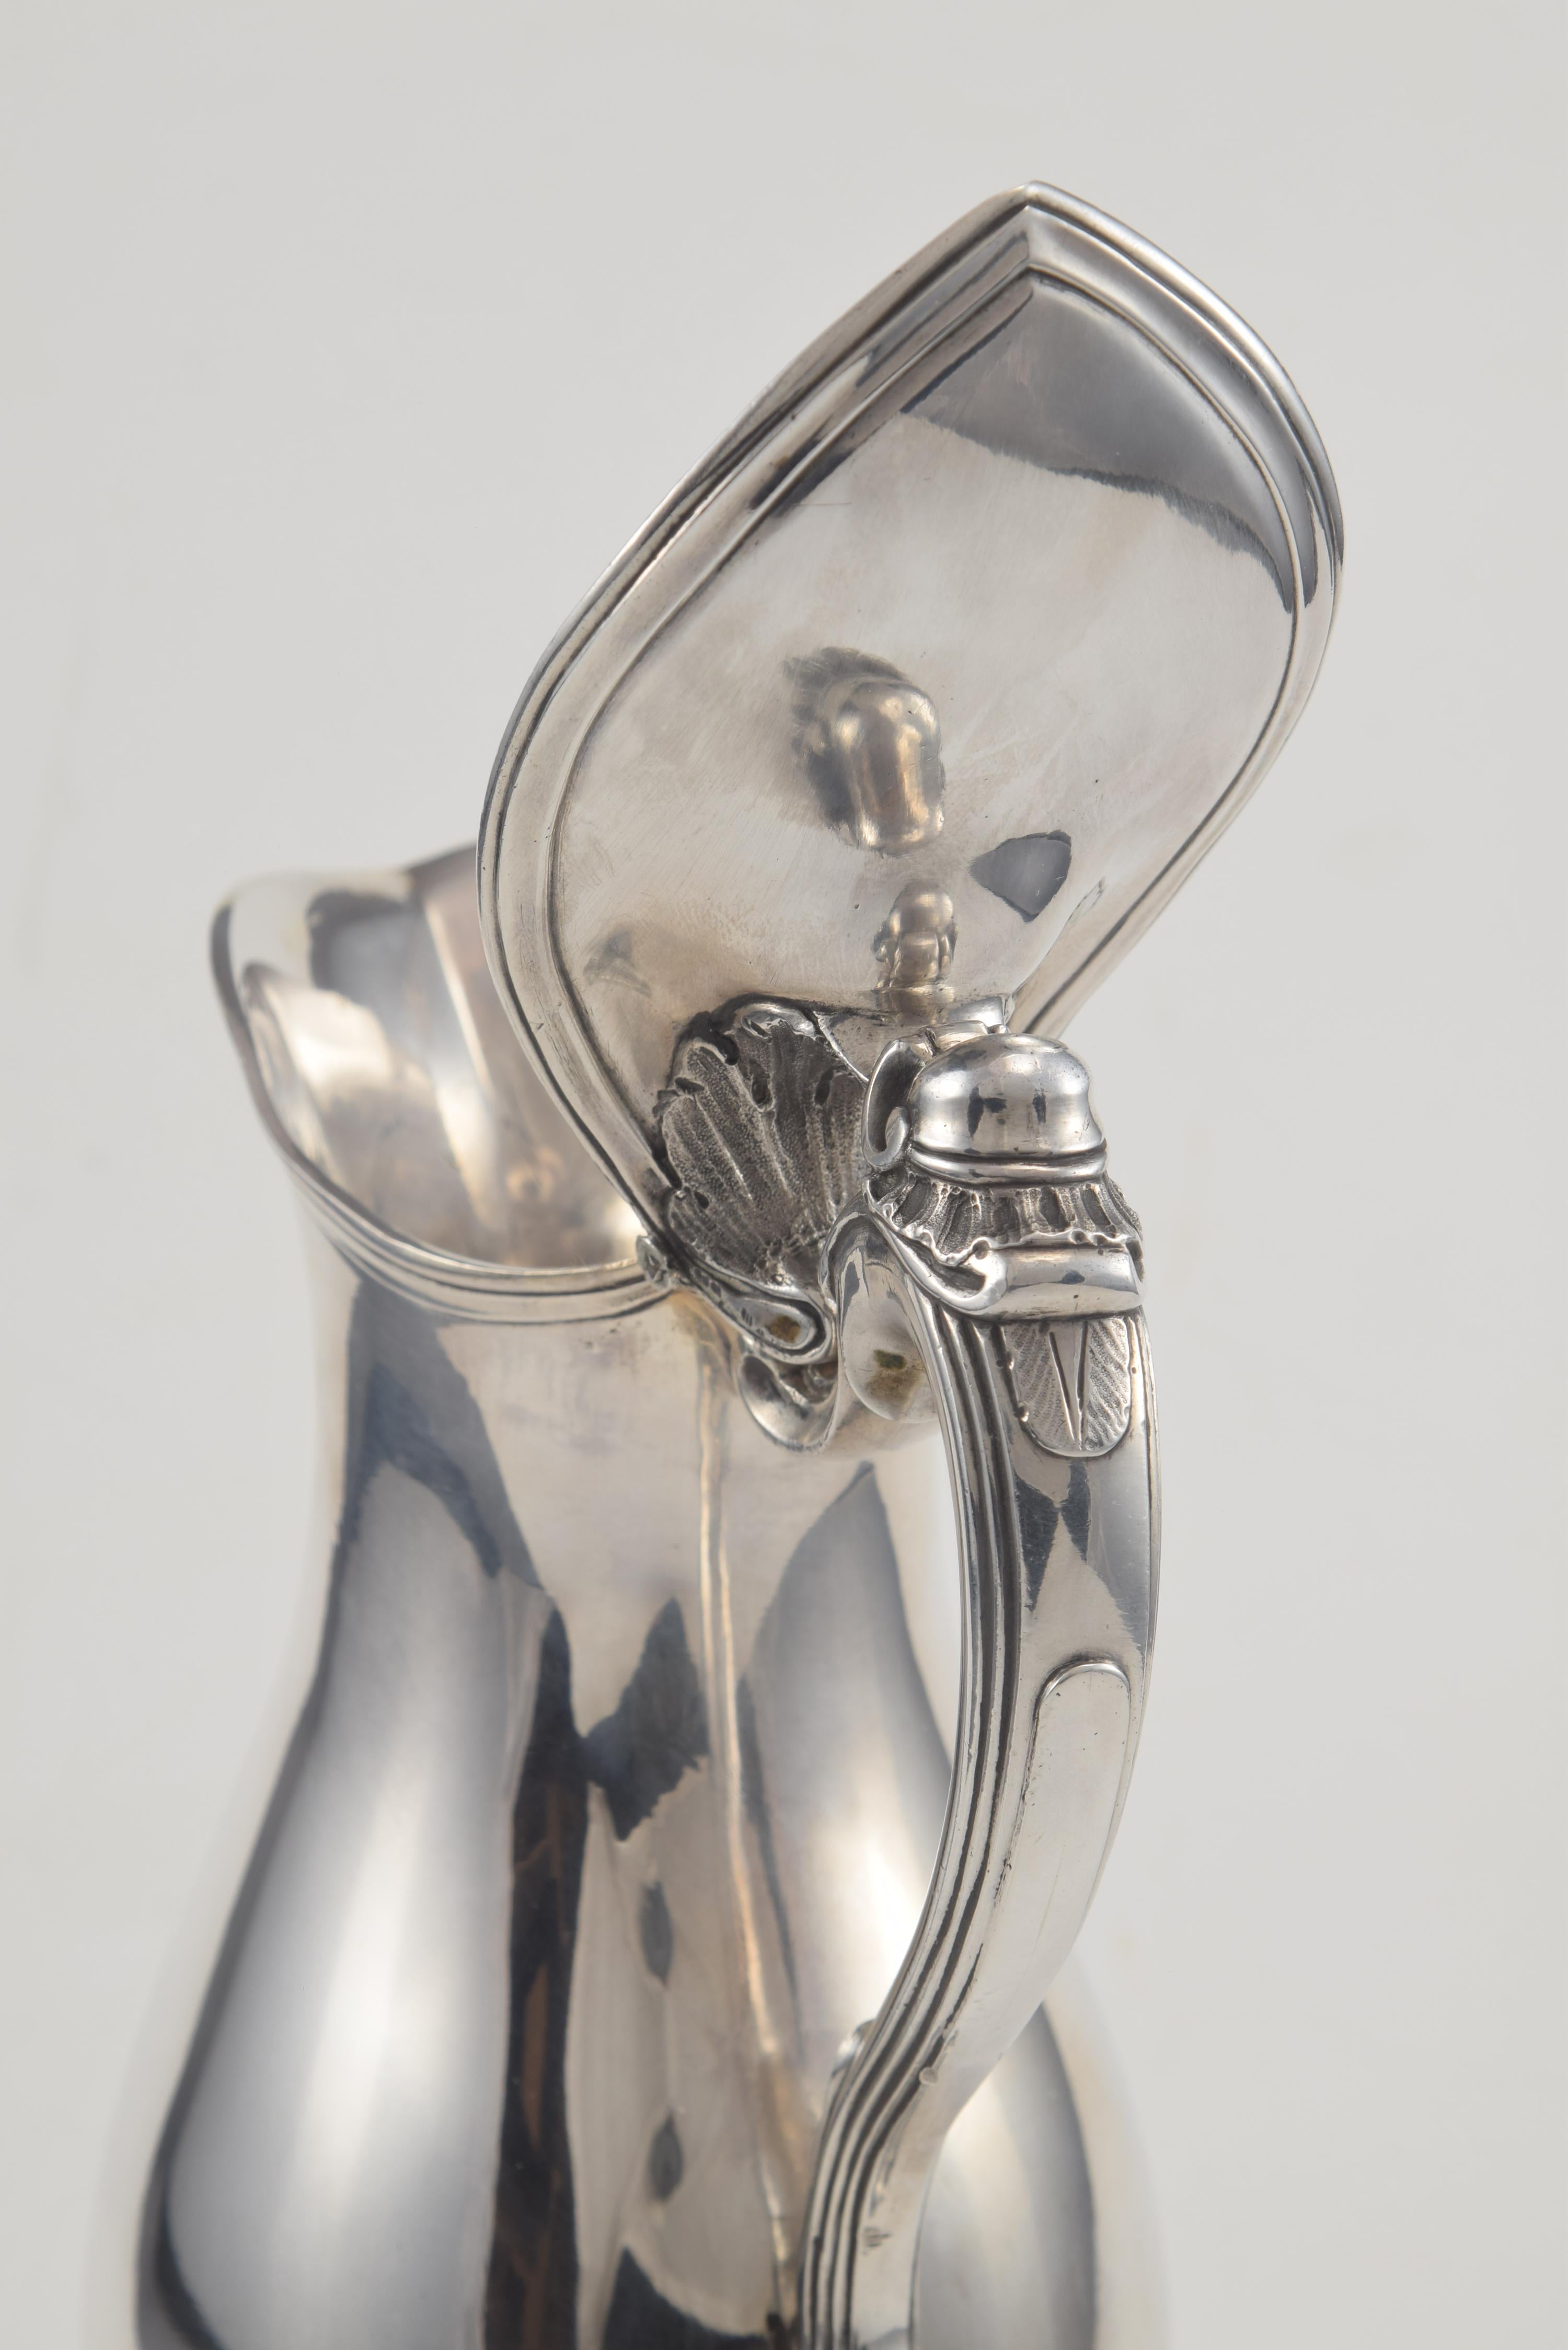 Sterling Silver Silver Pitcher or Jar, Madrid, Spain, 1790, with Hallmarks